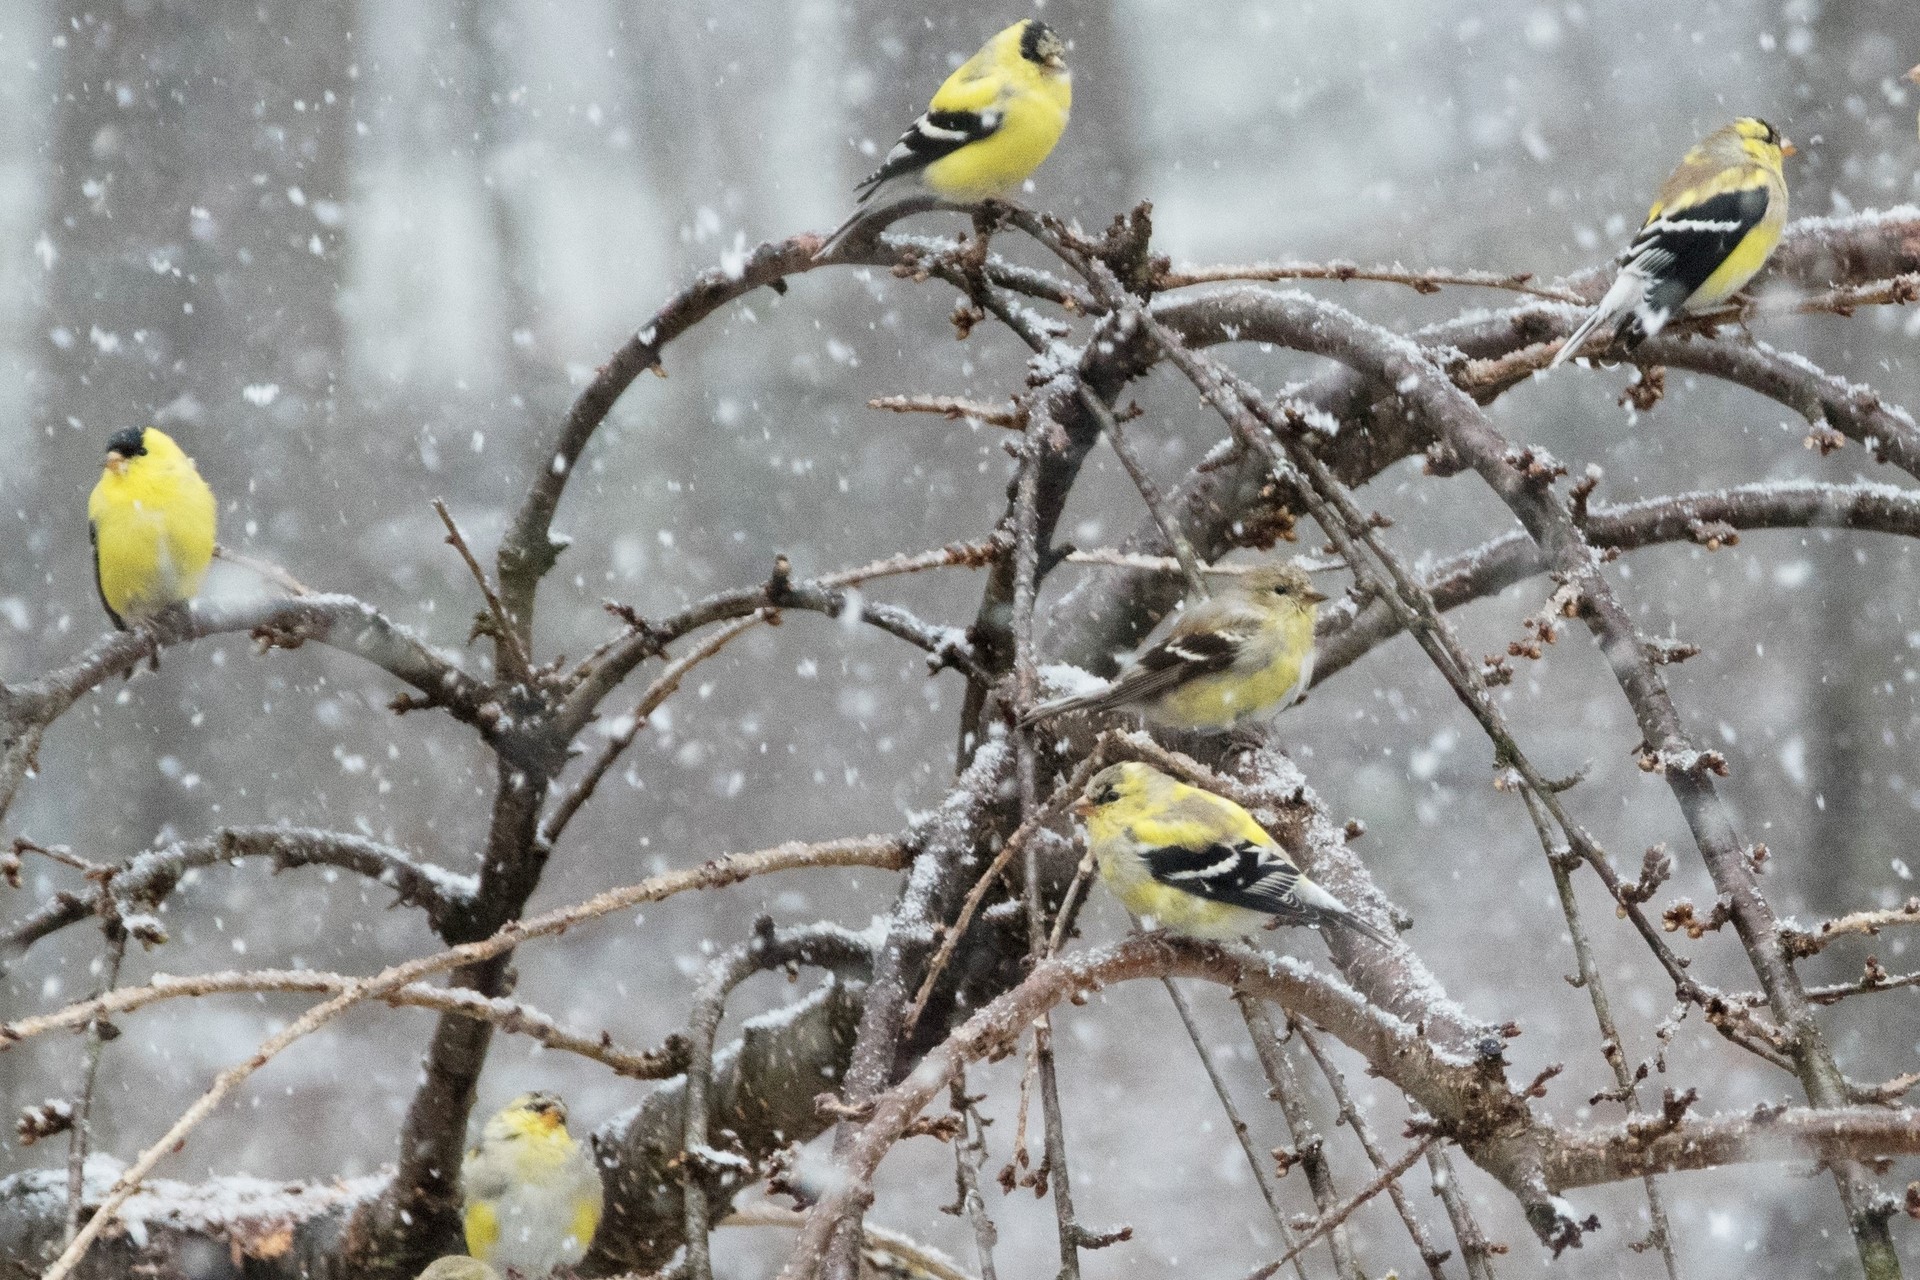 American goldfinches perched in tree among snow falling